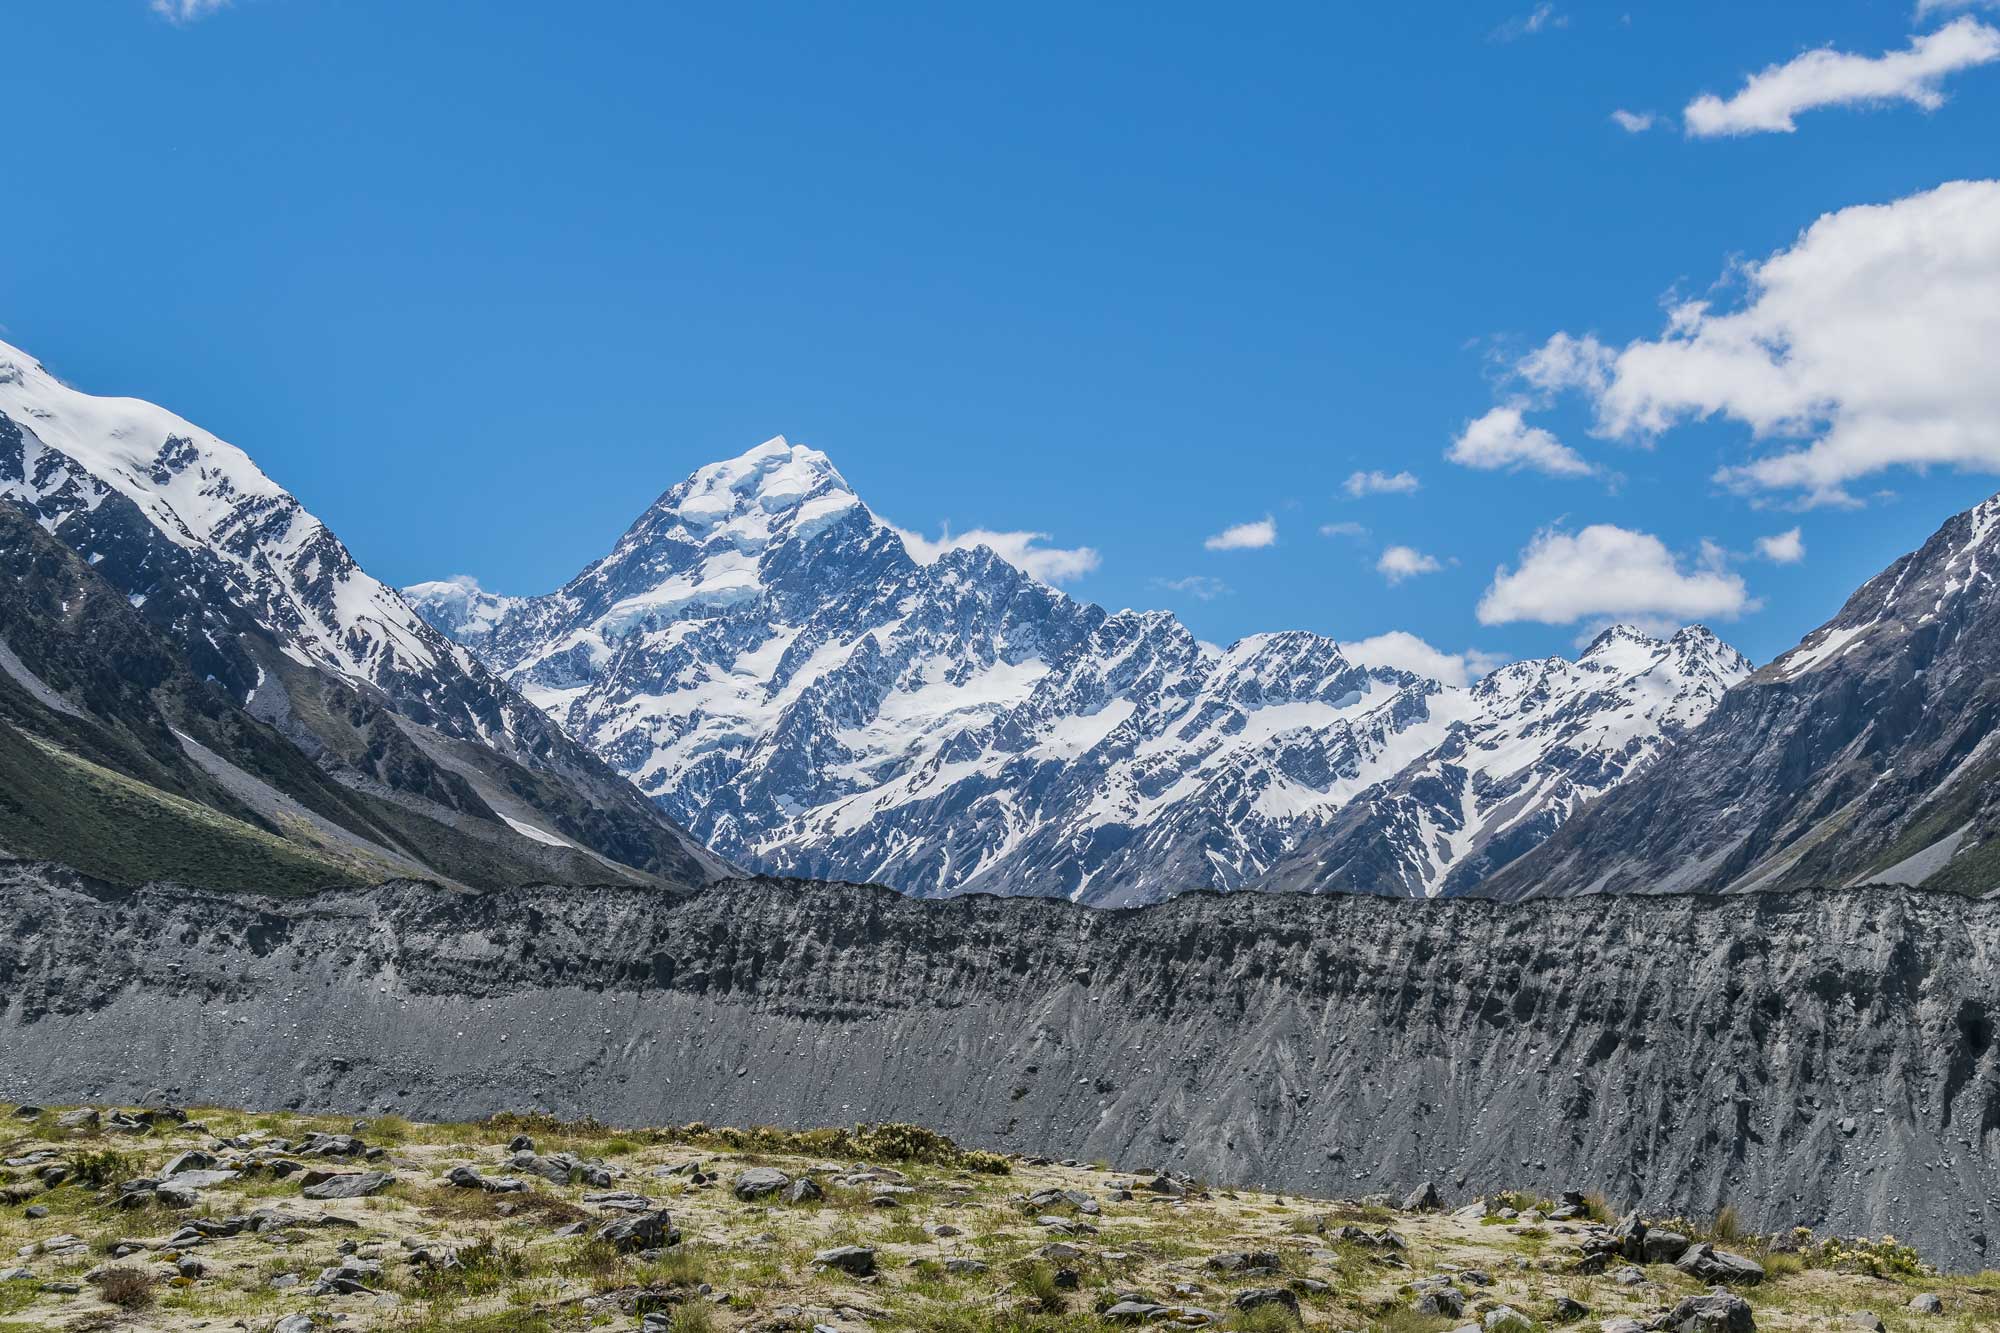 Photograph of Mueller lateral moraine in New Zealand. The photo shows a gray ridge running horizontally across the foreground of the image, which is the moraine. A snow-dusted mountain rises in the background.